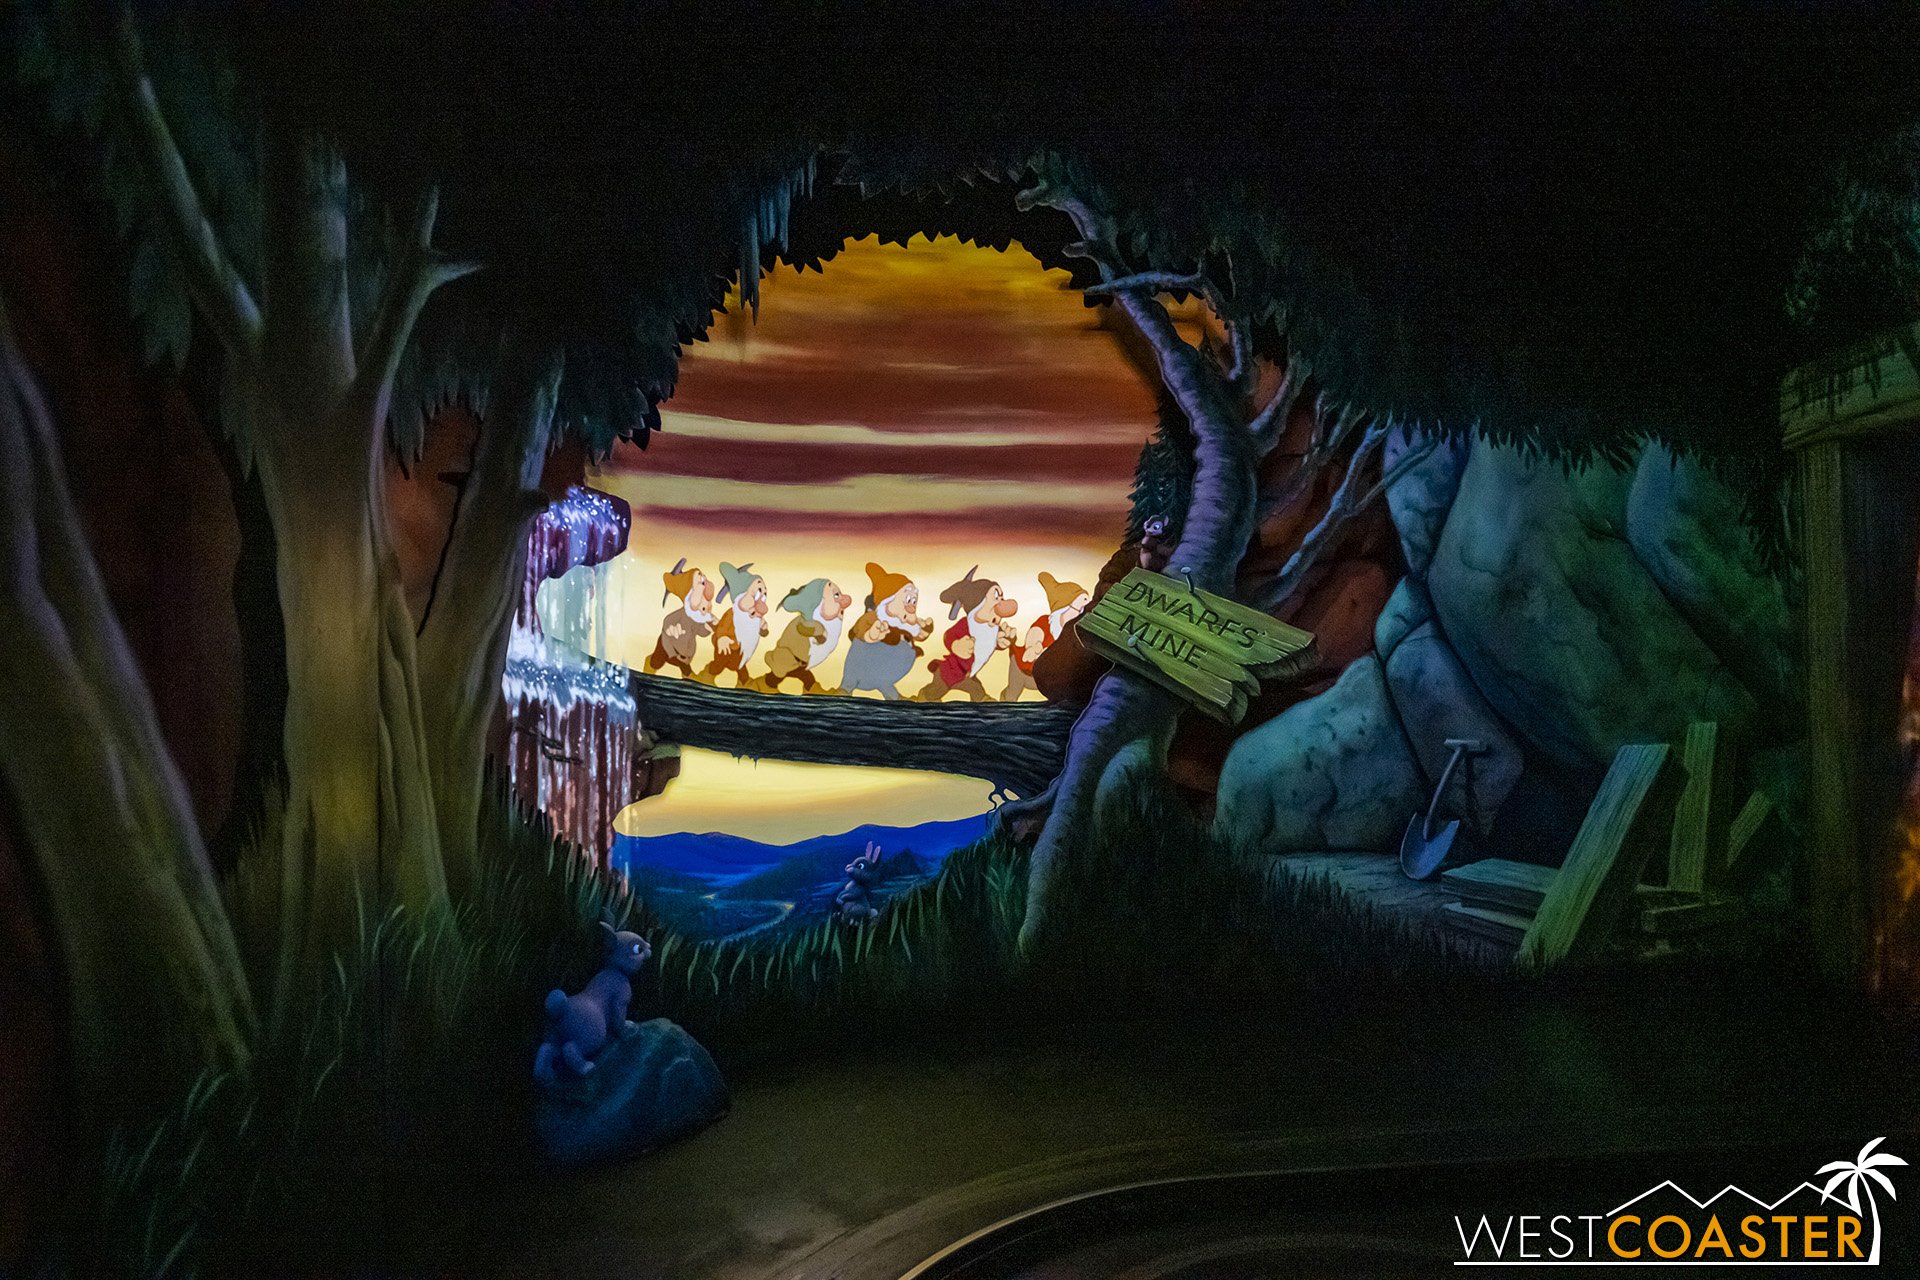  Leaving the cottage, guests follow the dwarfs to their mine.  The projection here is similar to the enhancement at the Alice in Wonderland ride several years ago. 